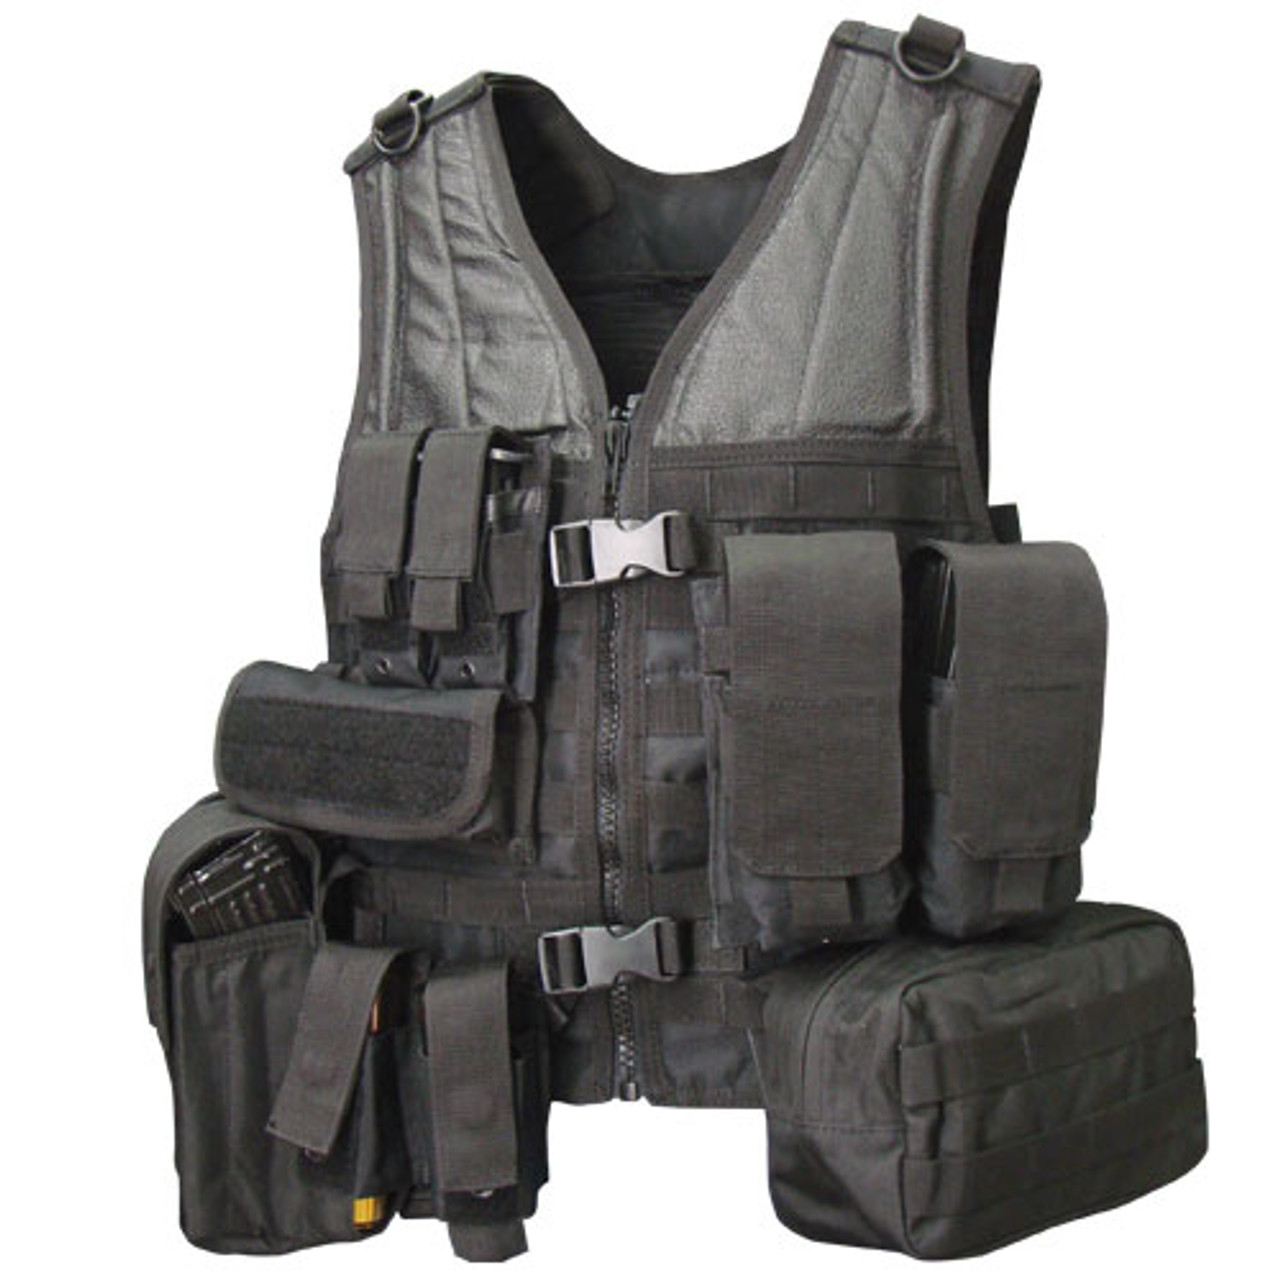 Condor MVP Complete Modular Tactical Vest at AirsoftMaster.com